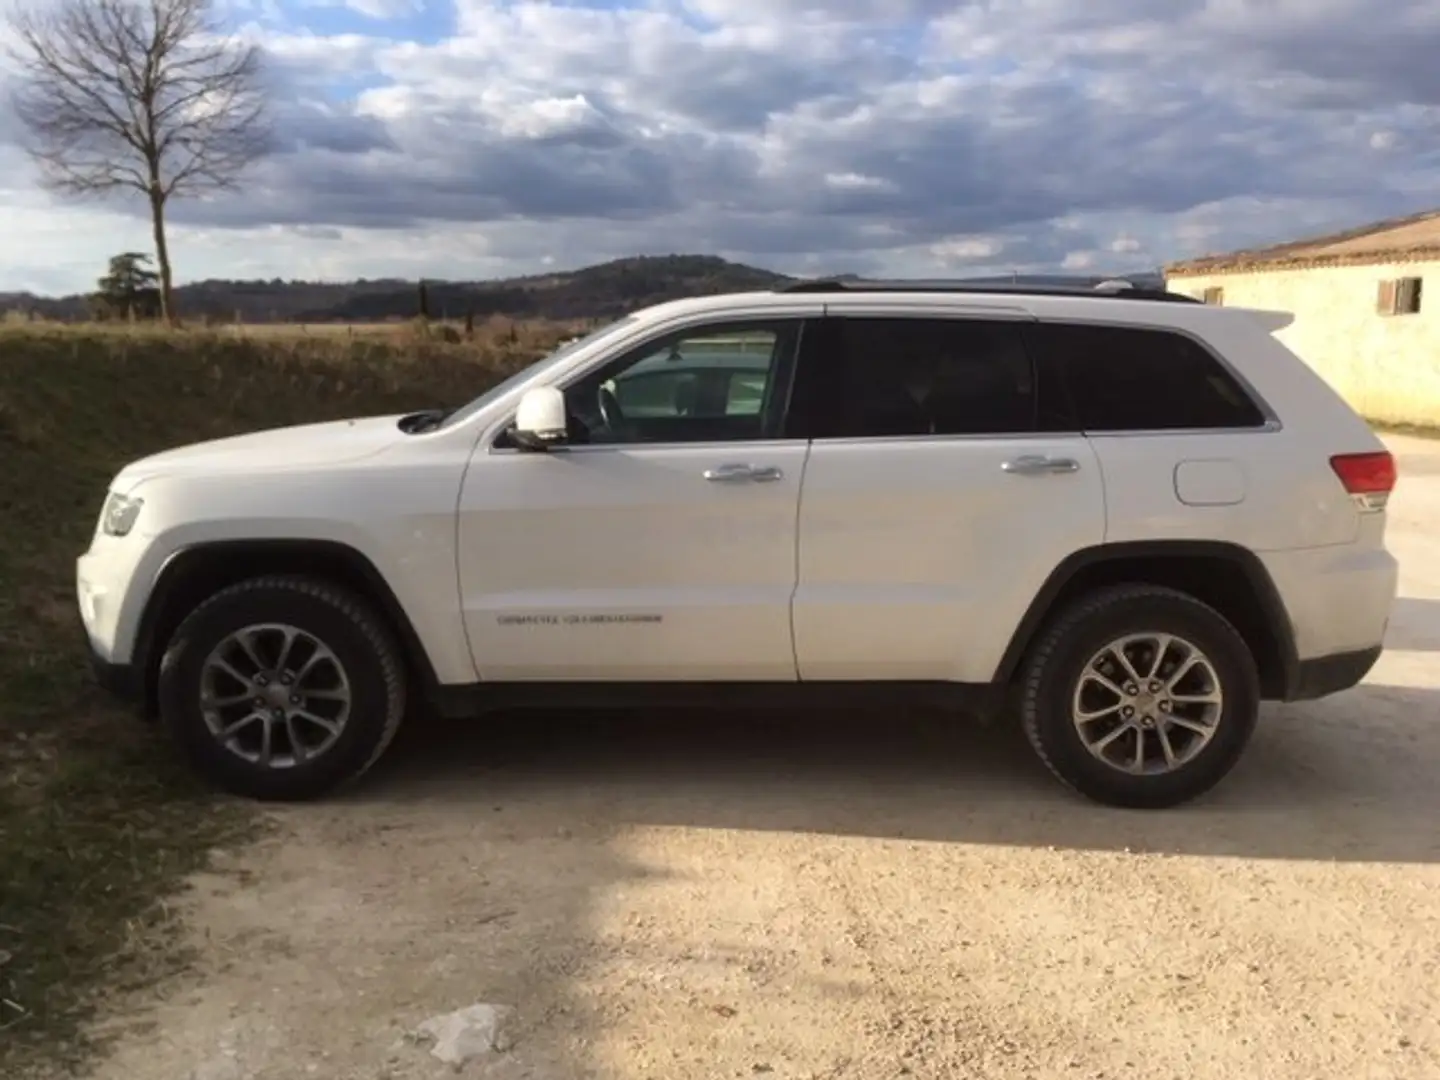 Jeep Grand Cherokee V6 3.0 CRD FAP 241 Limited A White - 2